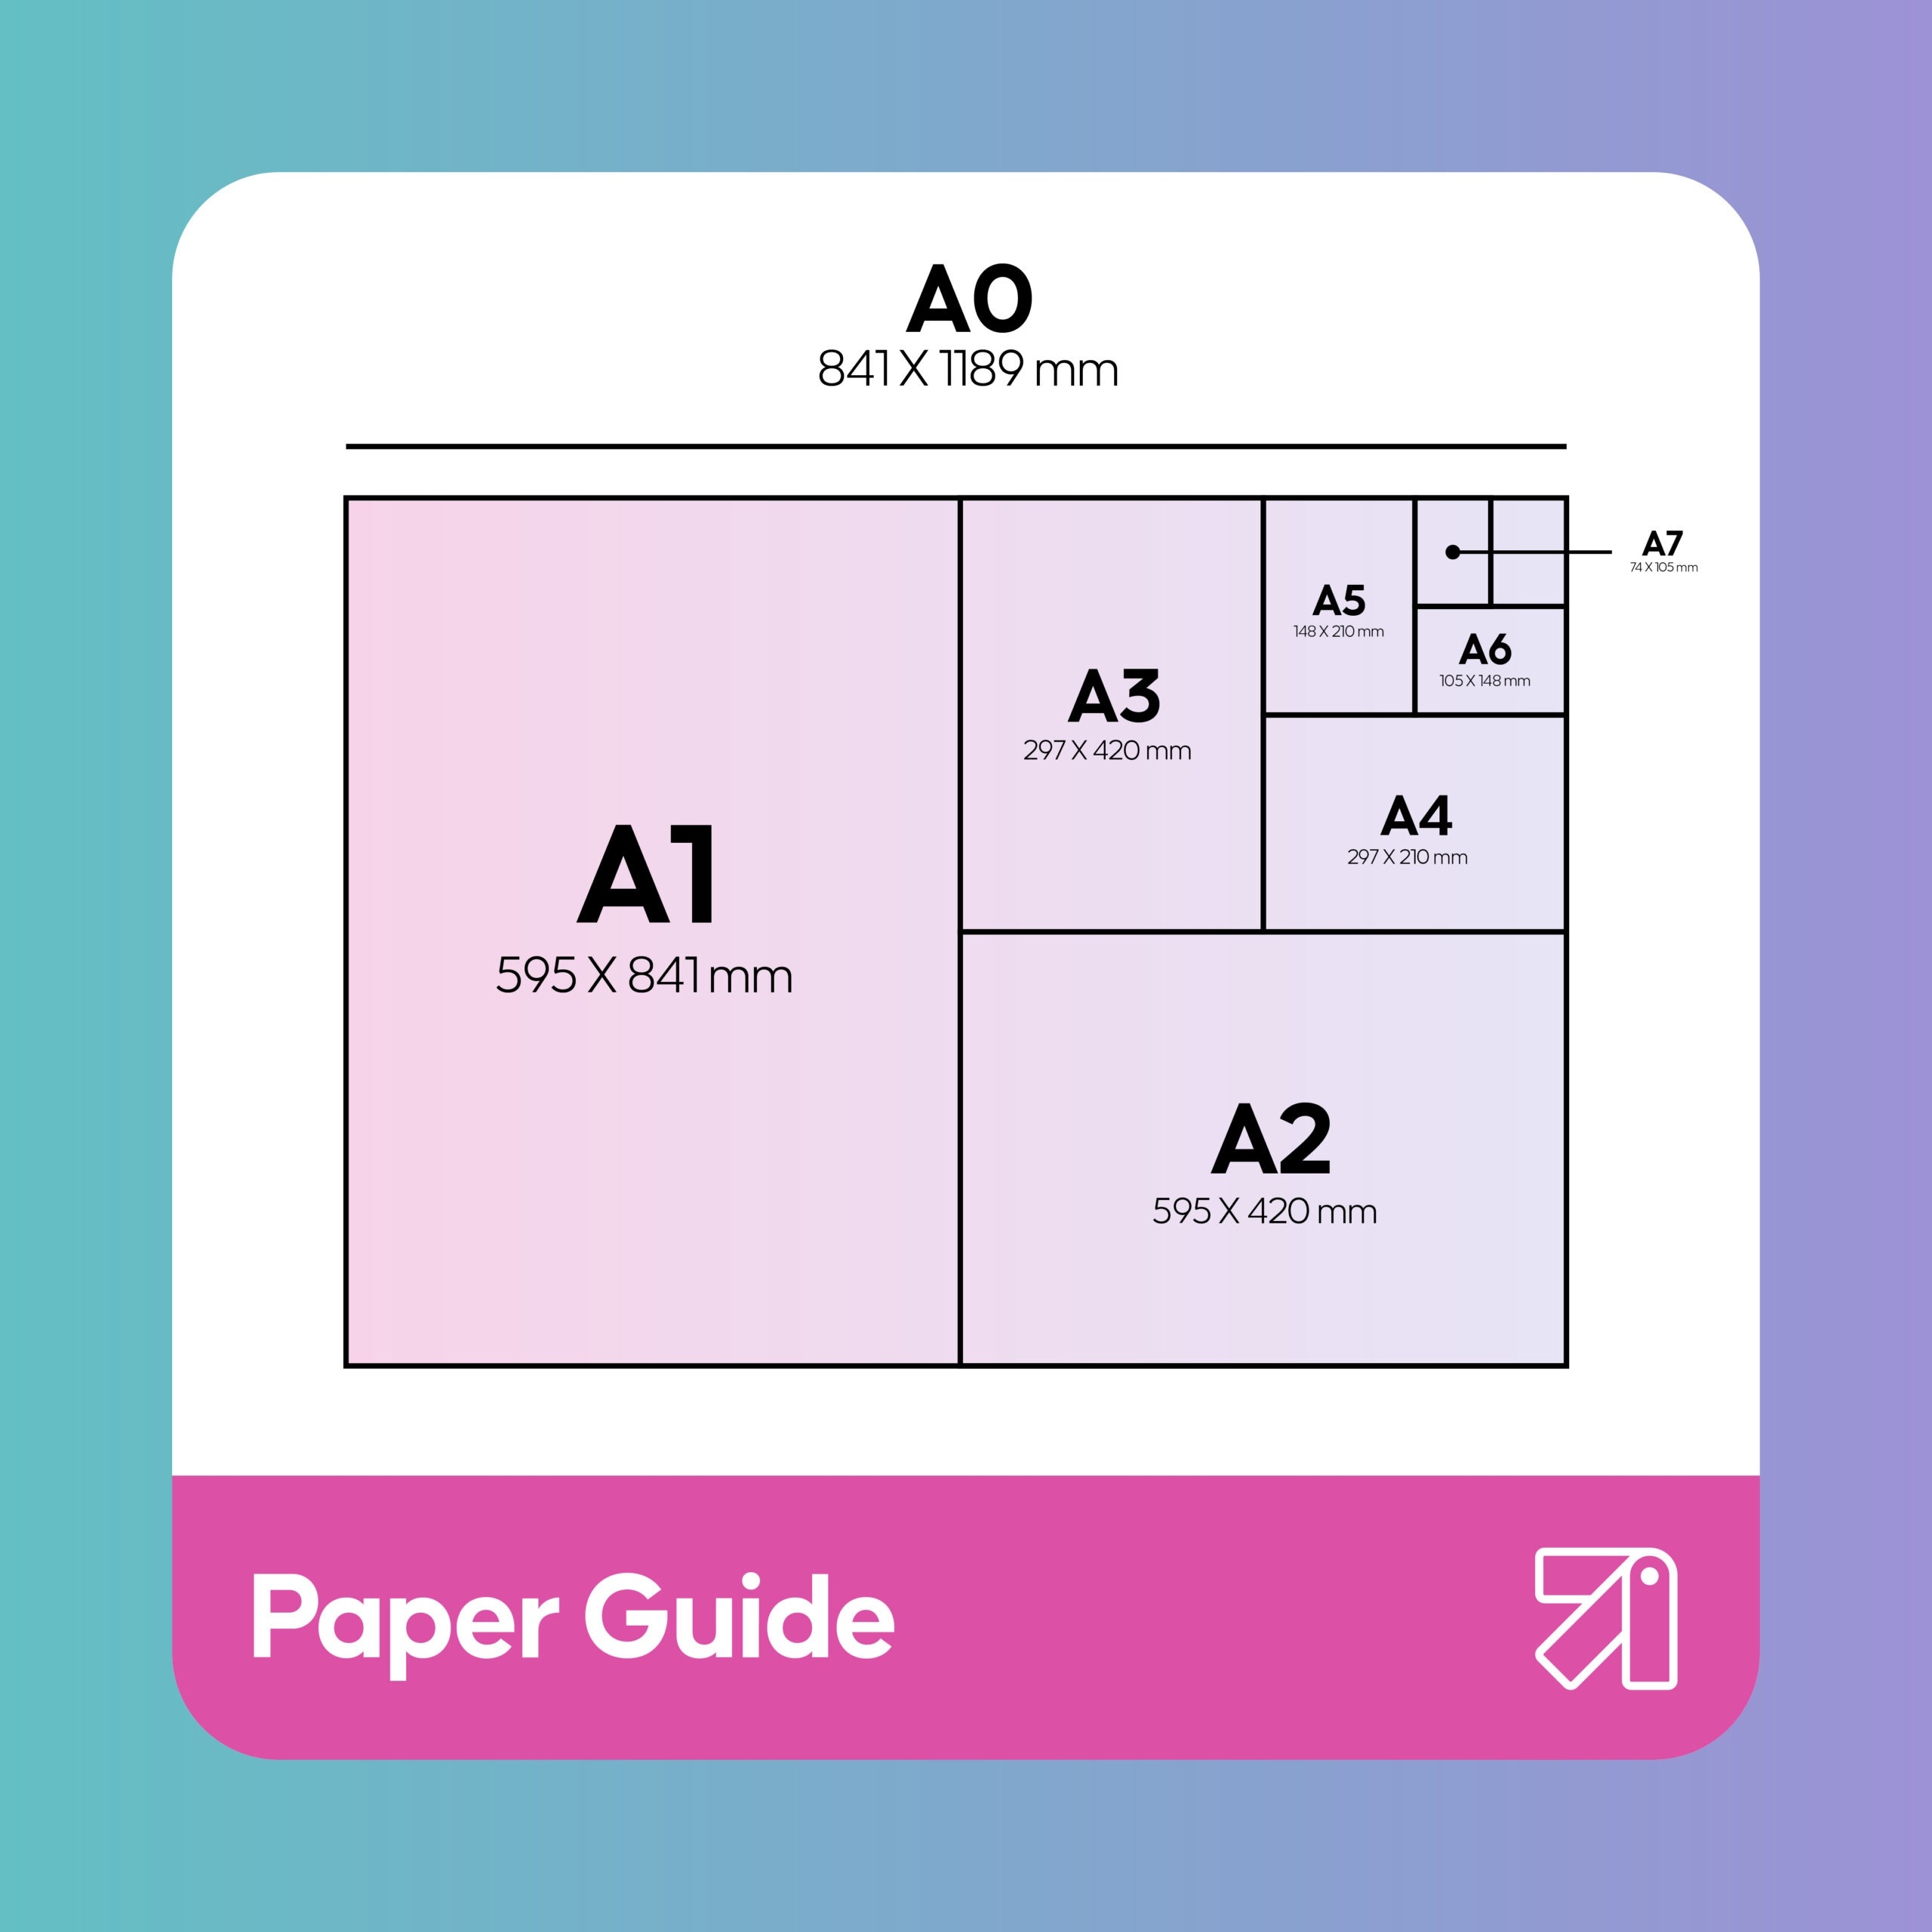 Paper Size Guide A0 A1 A2 A3 A4 To A7